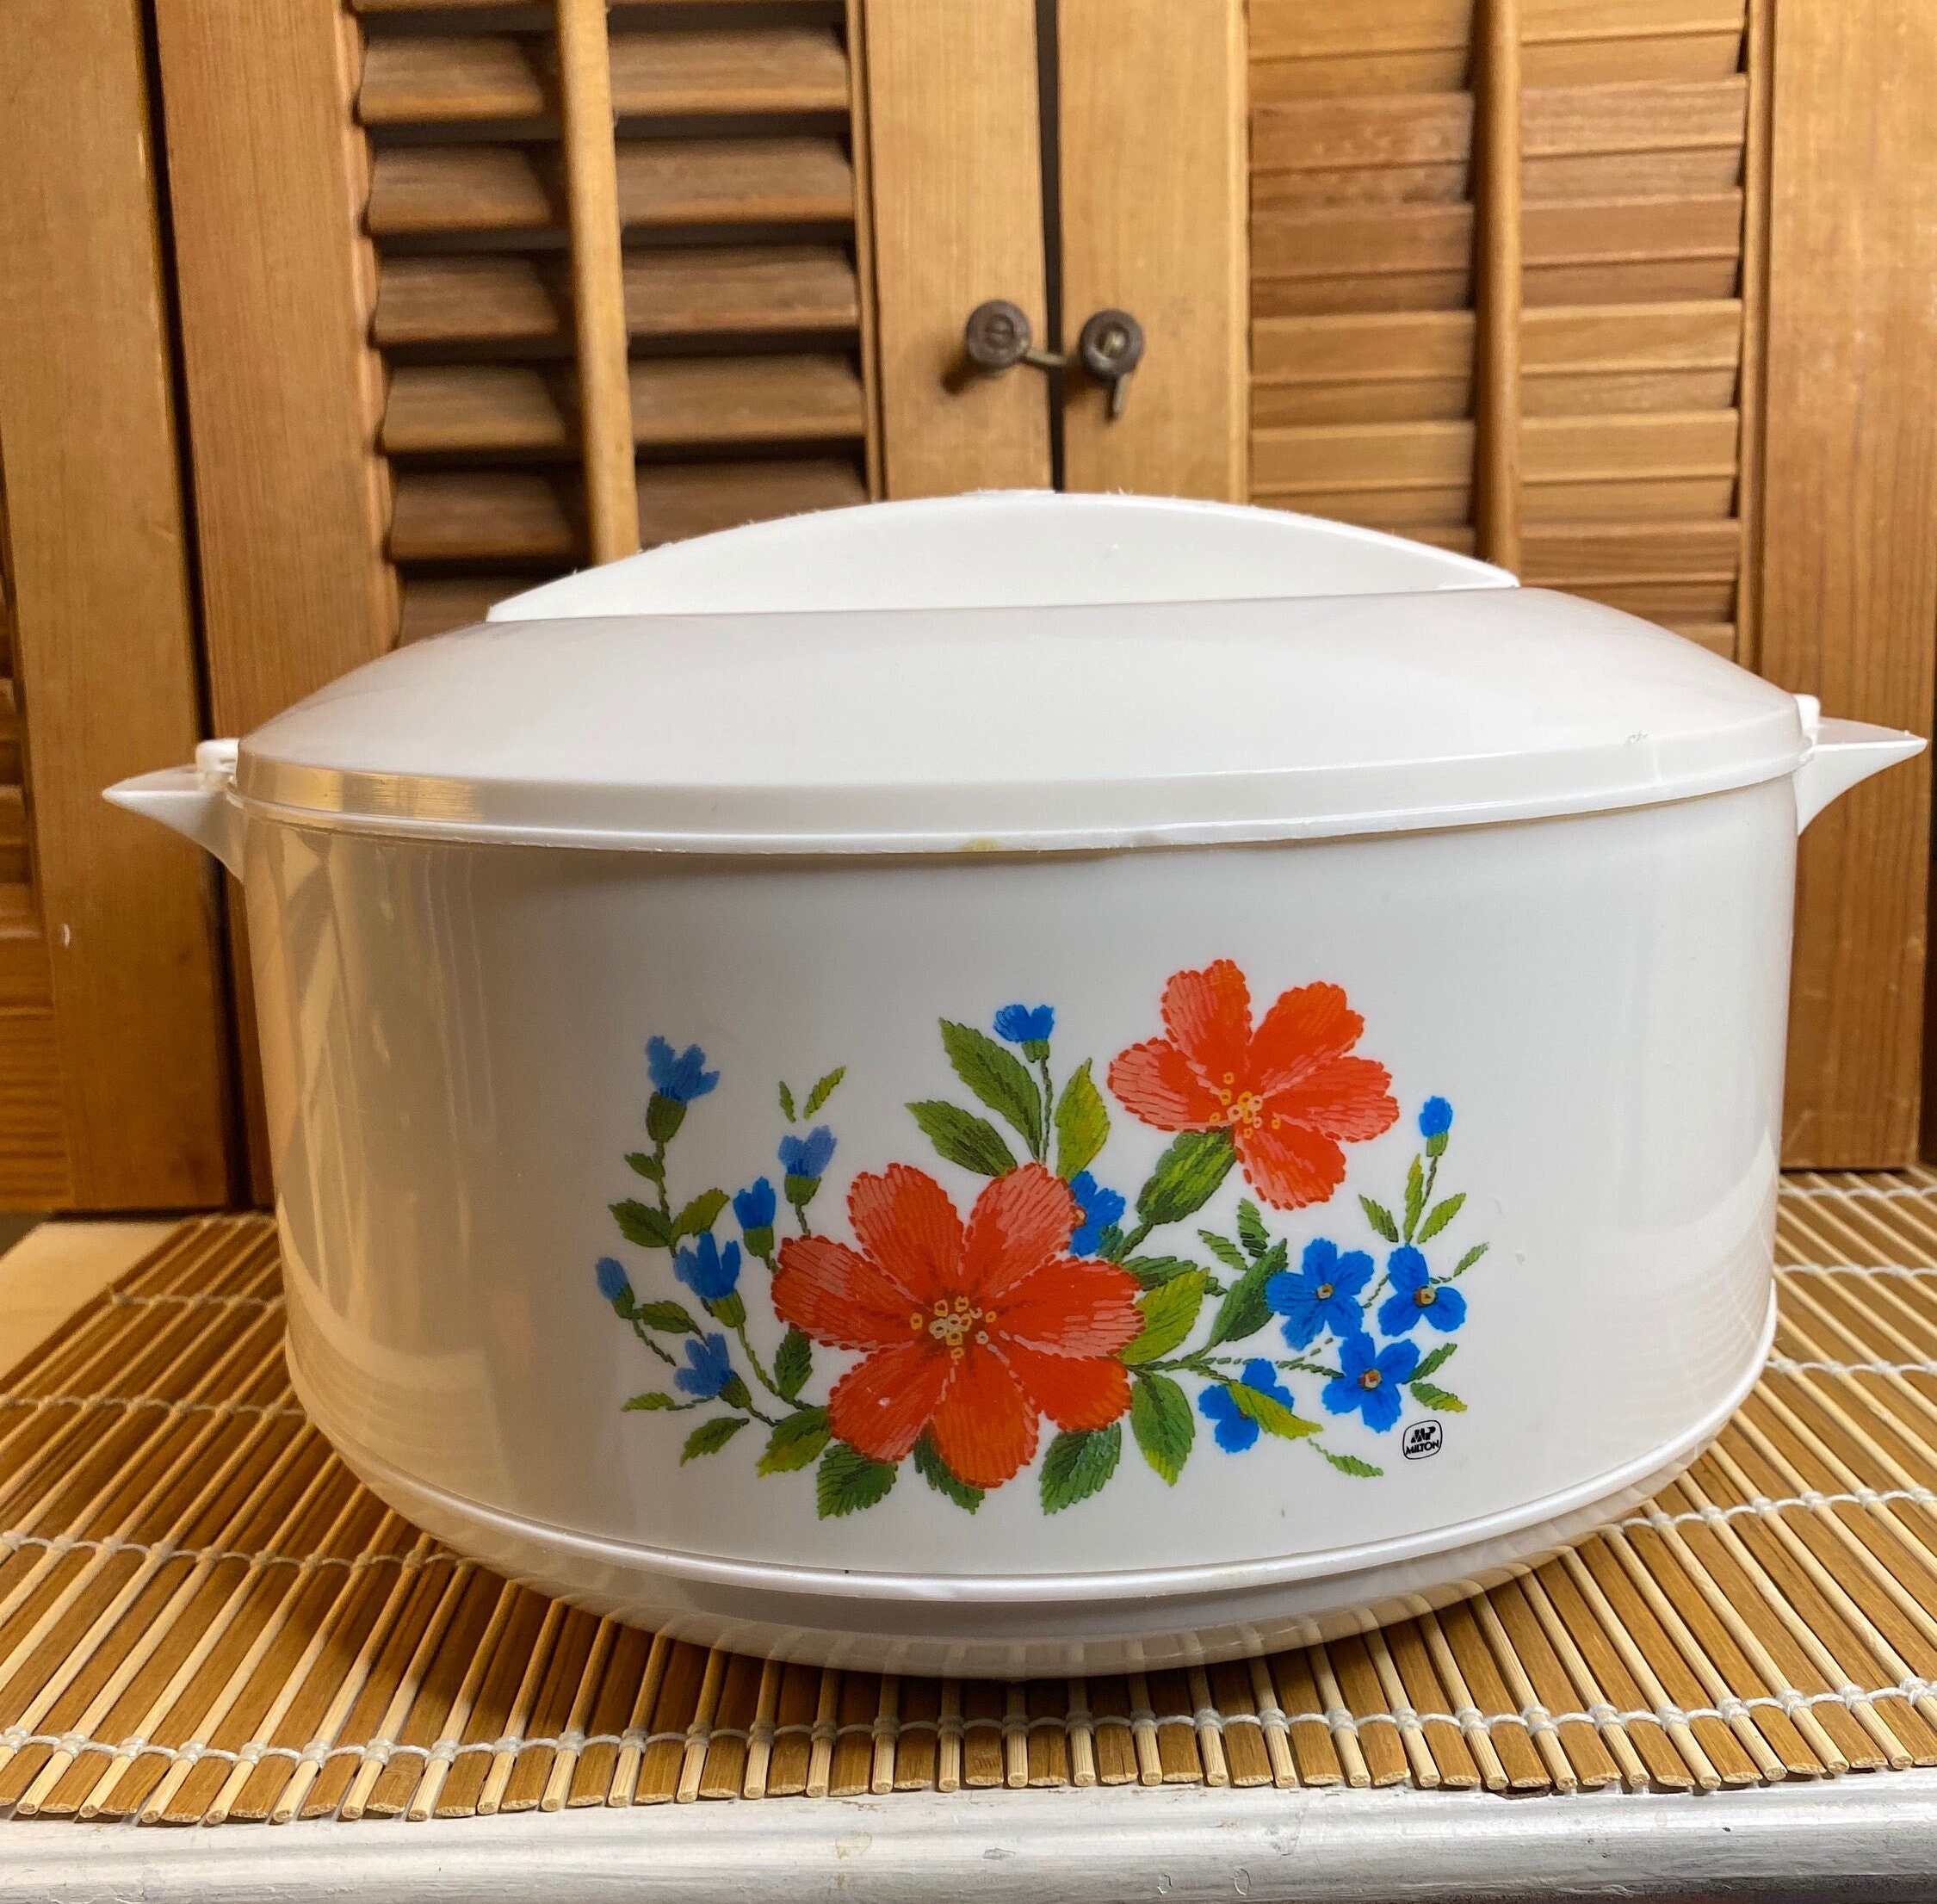 Microwavable Insulated Serving Bowl with Locking Lid